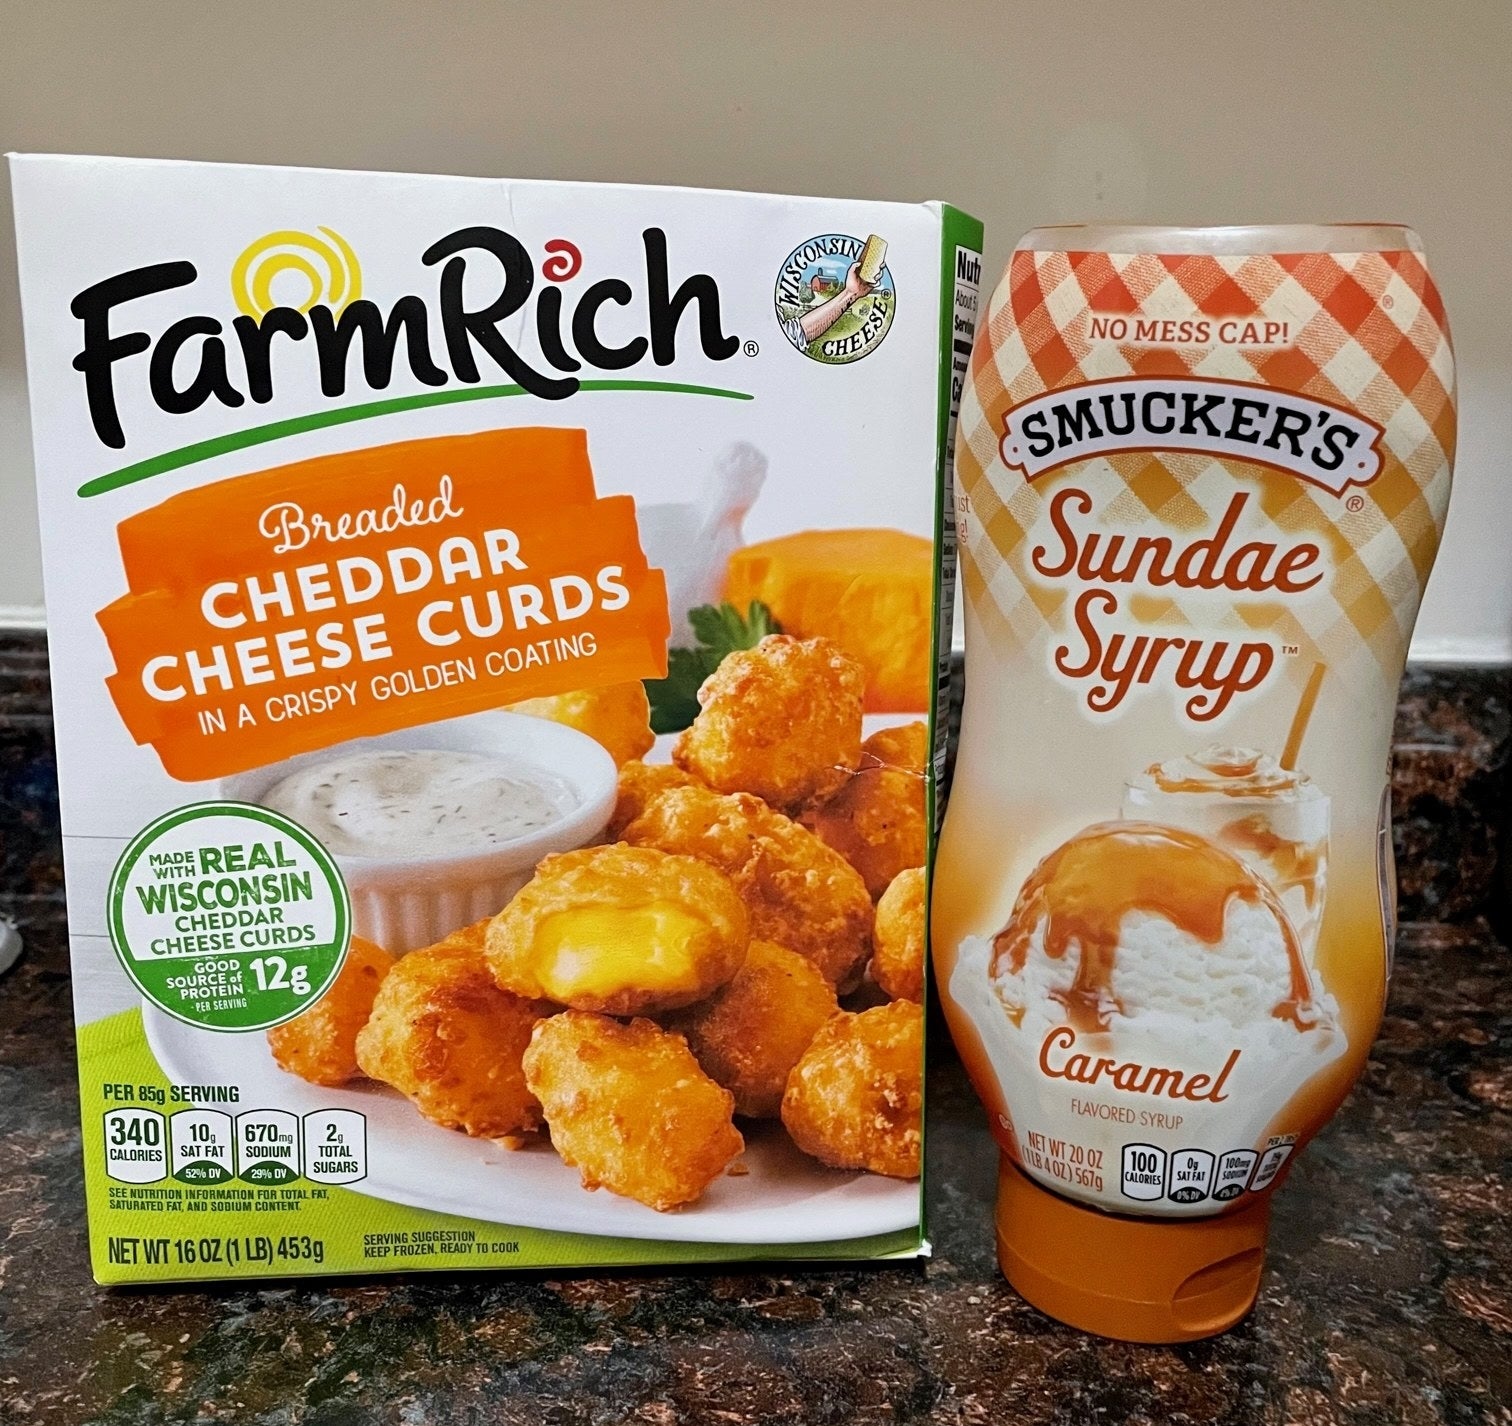 Farm Rich cheese curds and caramel syrup